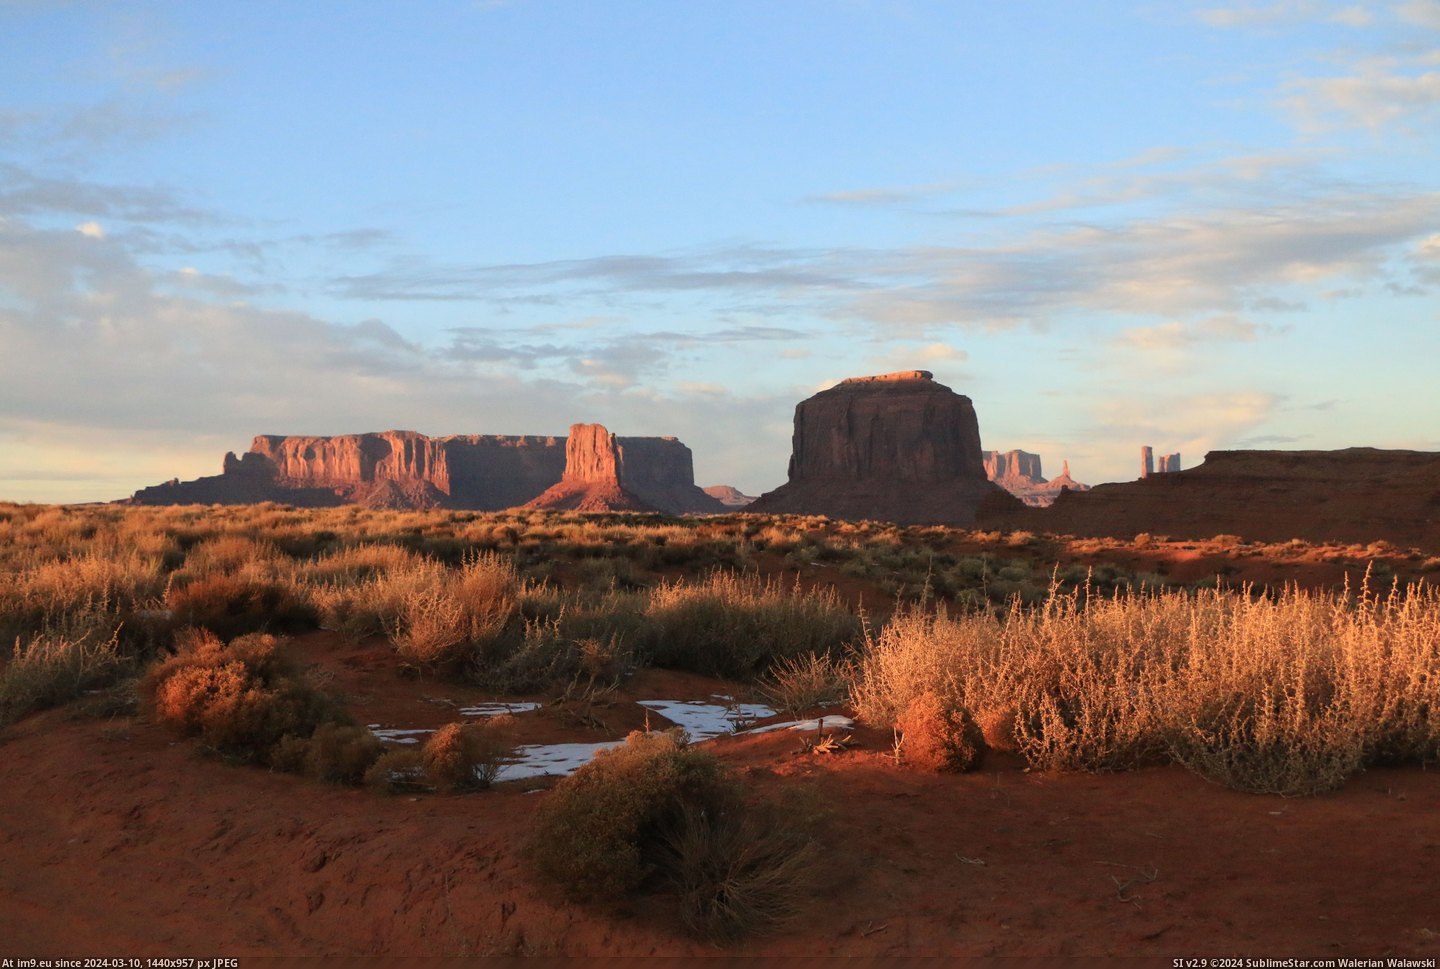 #Wallpaper #Beautiful #Favorite #Sunset #Desert #Clouds #Monument #Canon #Valley #Place #Sky #Utah [Earthporn] My favorite place Monument Valley, Utah. December 28th 2015. Sunset. (Canon 70D)  [4096x2732] Pic. (Изображение из альбом My r/EARTHPORN favs))